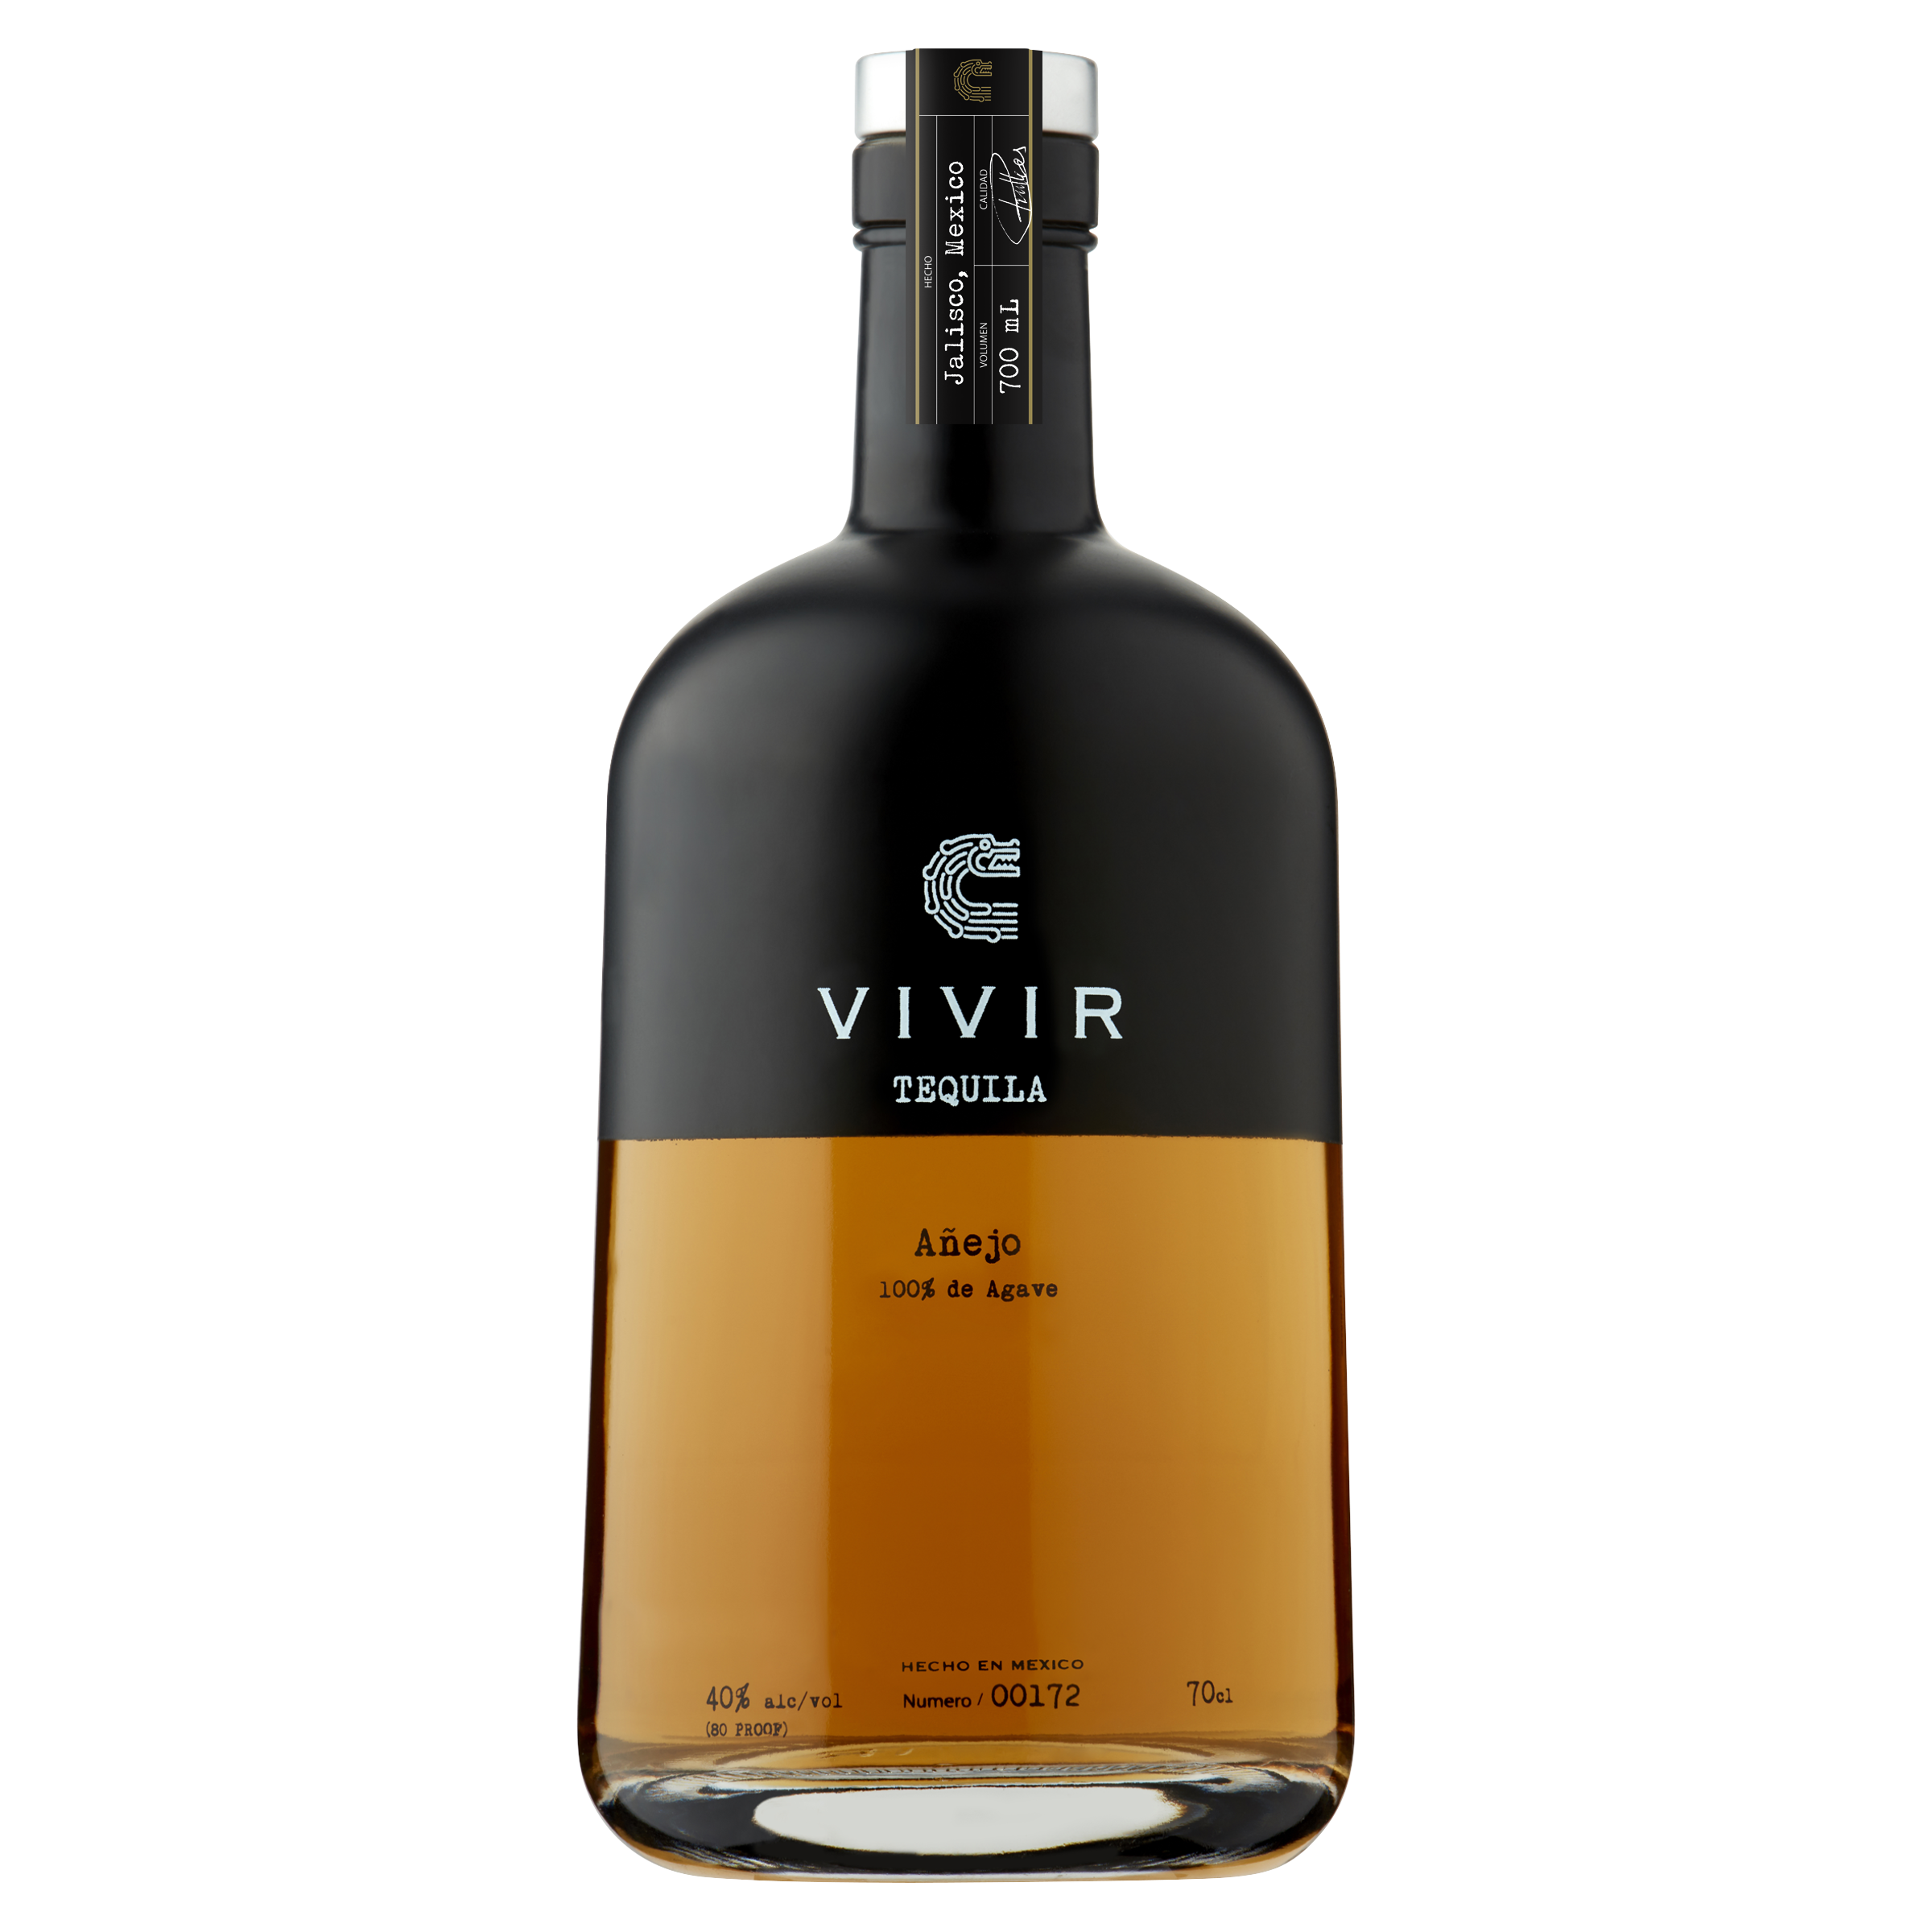 A bottle of VIVIR Tequila Añejo. The top half of the bottle is black and displays the VIVIR Tequila logo, the bottom half of the bottle is transparent and shows the deep amber-coloured Tequila inside.